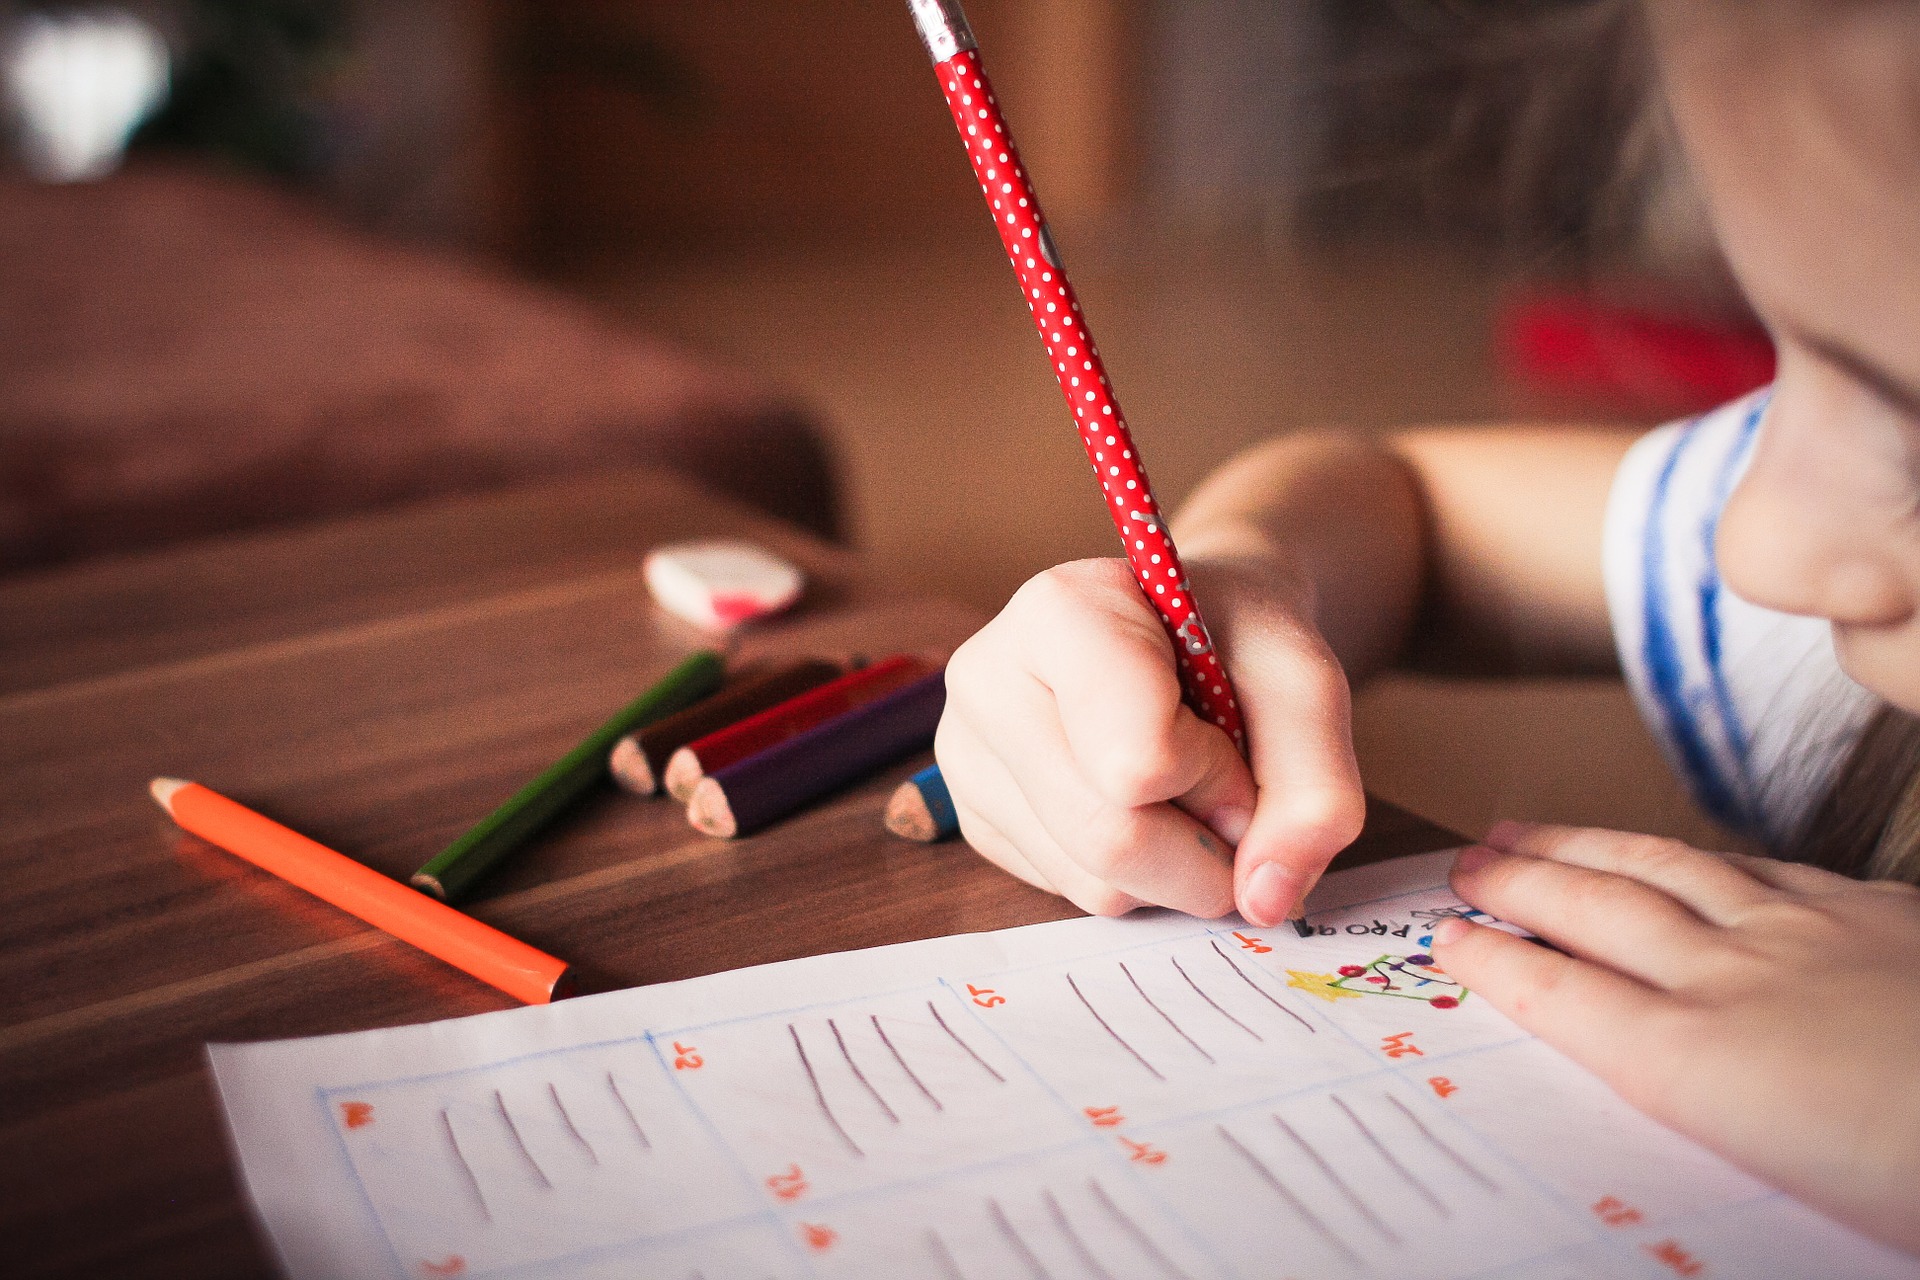 a child writing in a book with colored pencils strewn across the table